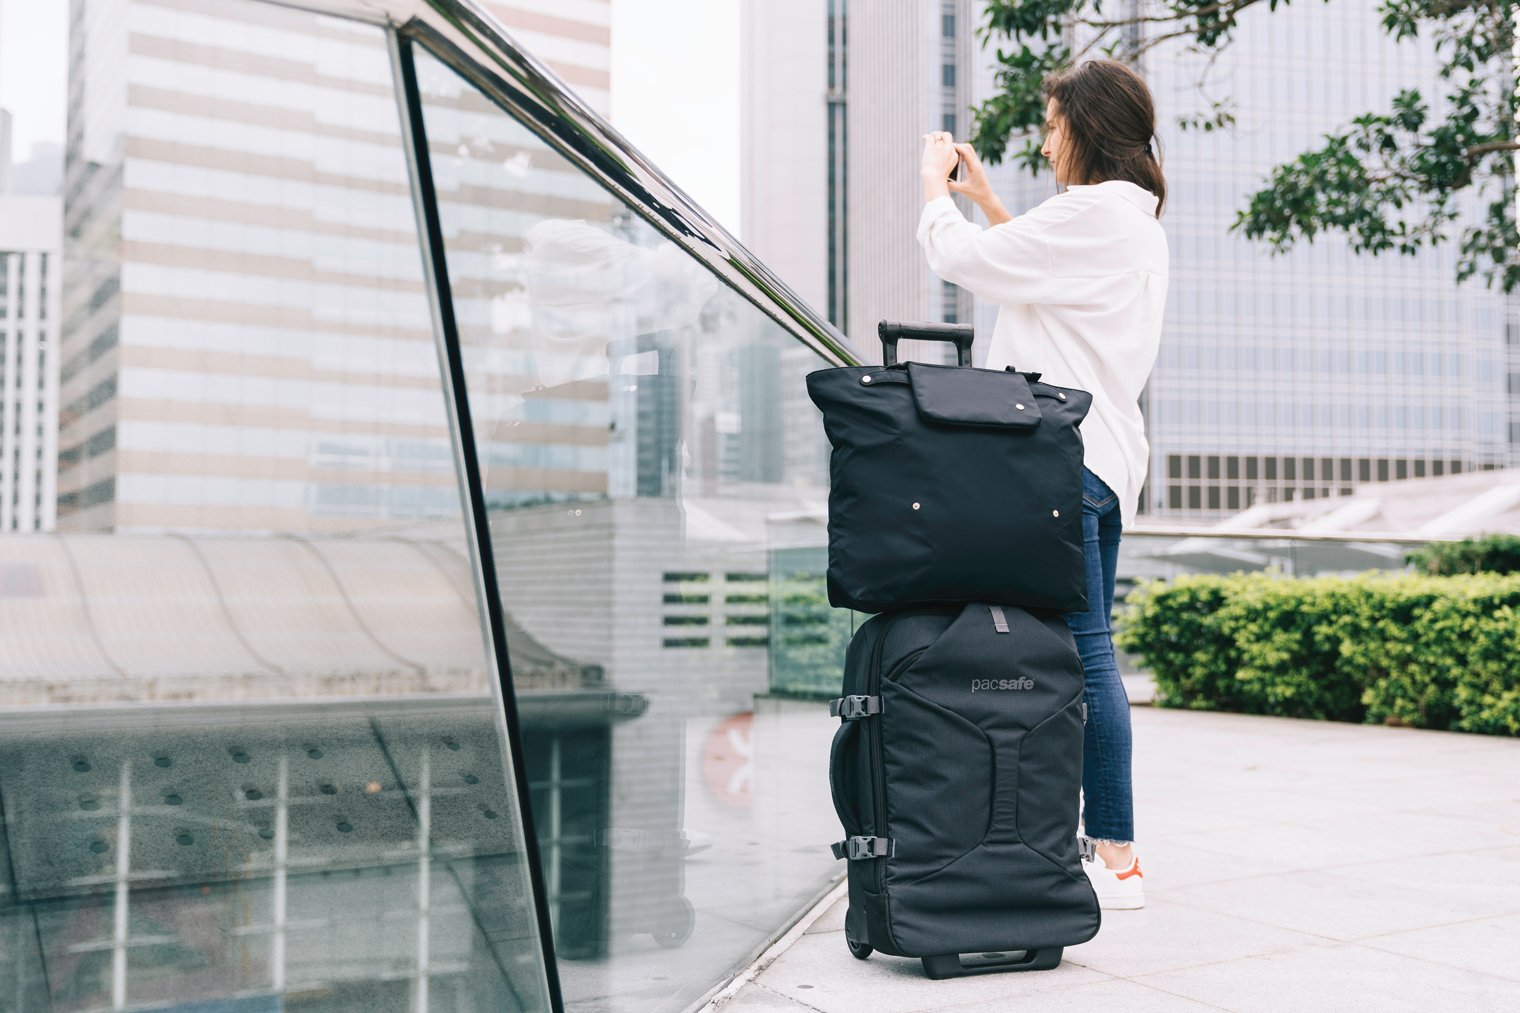 The Travel Hack Backpack & Tote Bag - Stylish Luggage For Any Trip